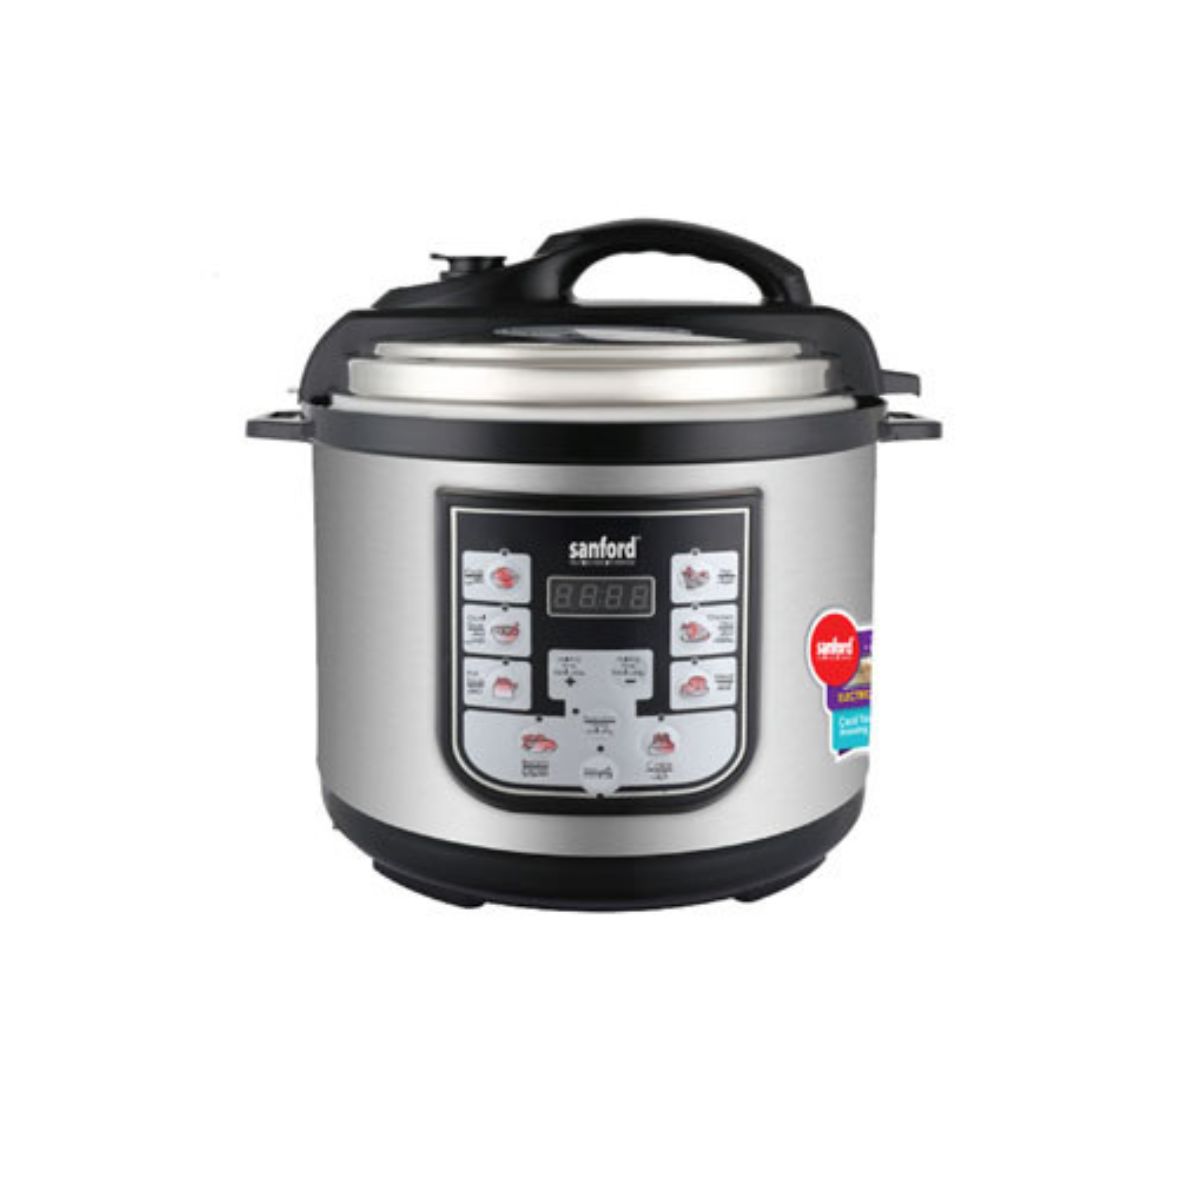 Sanford Electrical Cooker - SF3200EPC - Grey